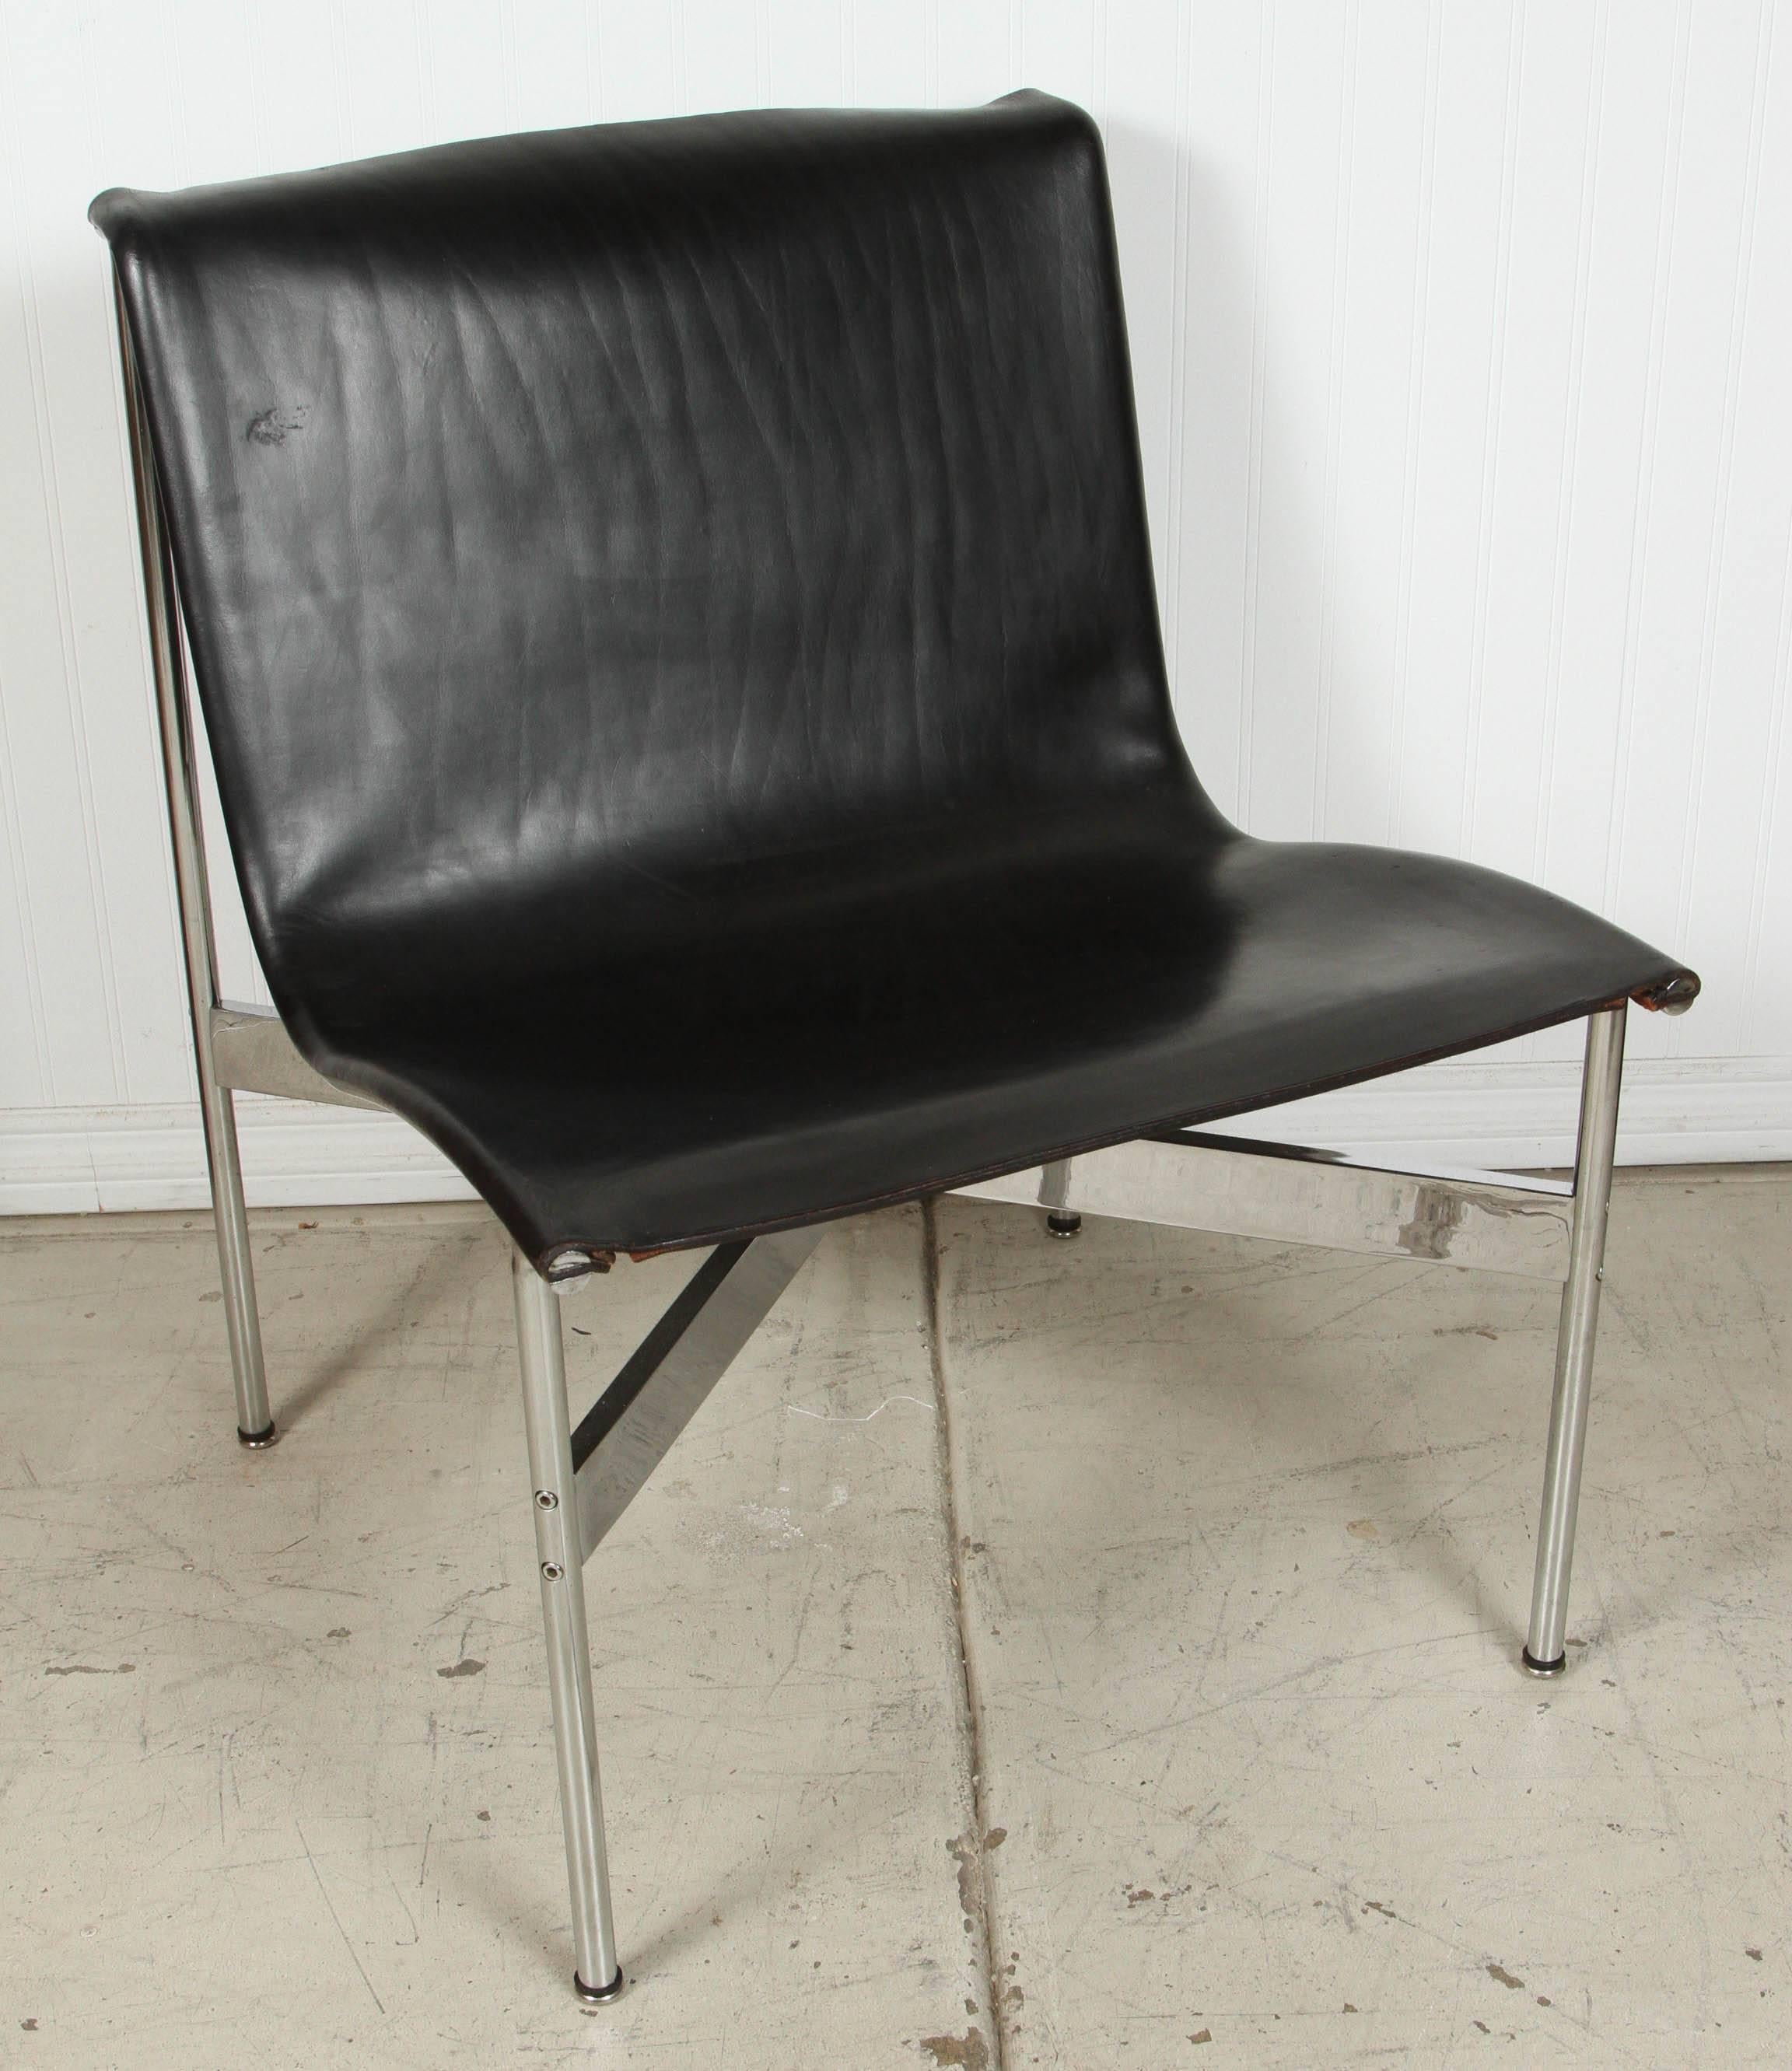 Pair of Leather and chrome chairs by Katavalos, Littell, and Kelly 1